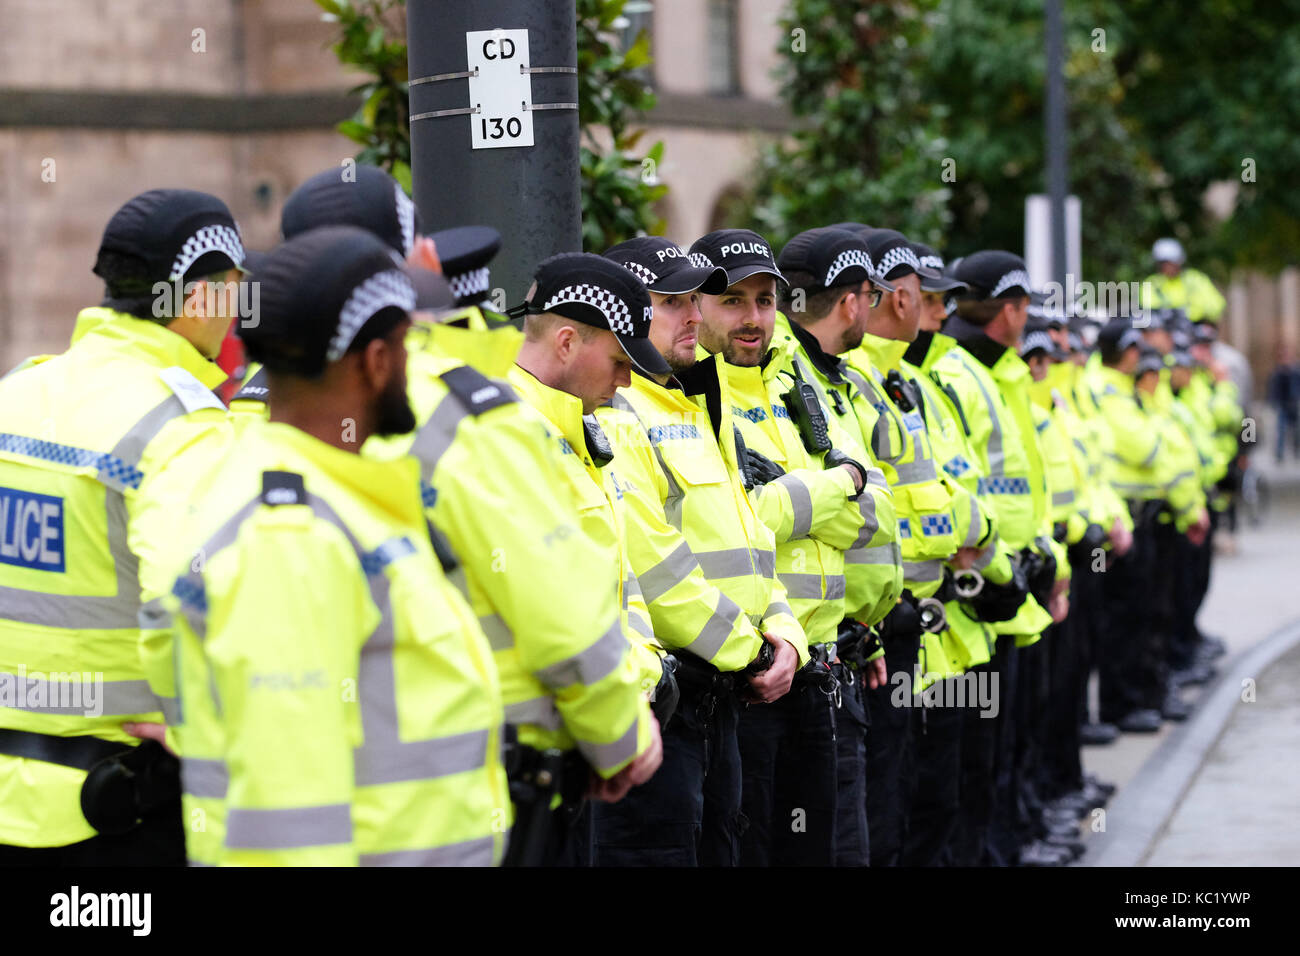 St Peters Square, Manchester, UK - Sunday 1st October 2017 - A long line of Police officers deployed around the outside the Conservative Party Conference. Photo Steven May / Alamy Live News Stock Photo